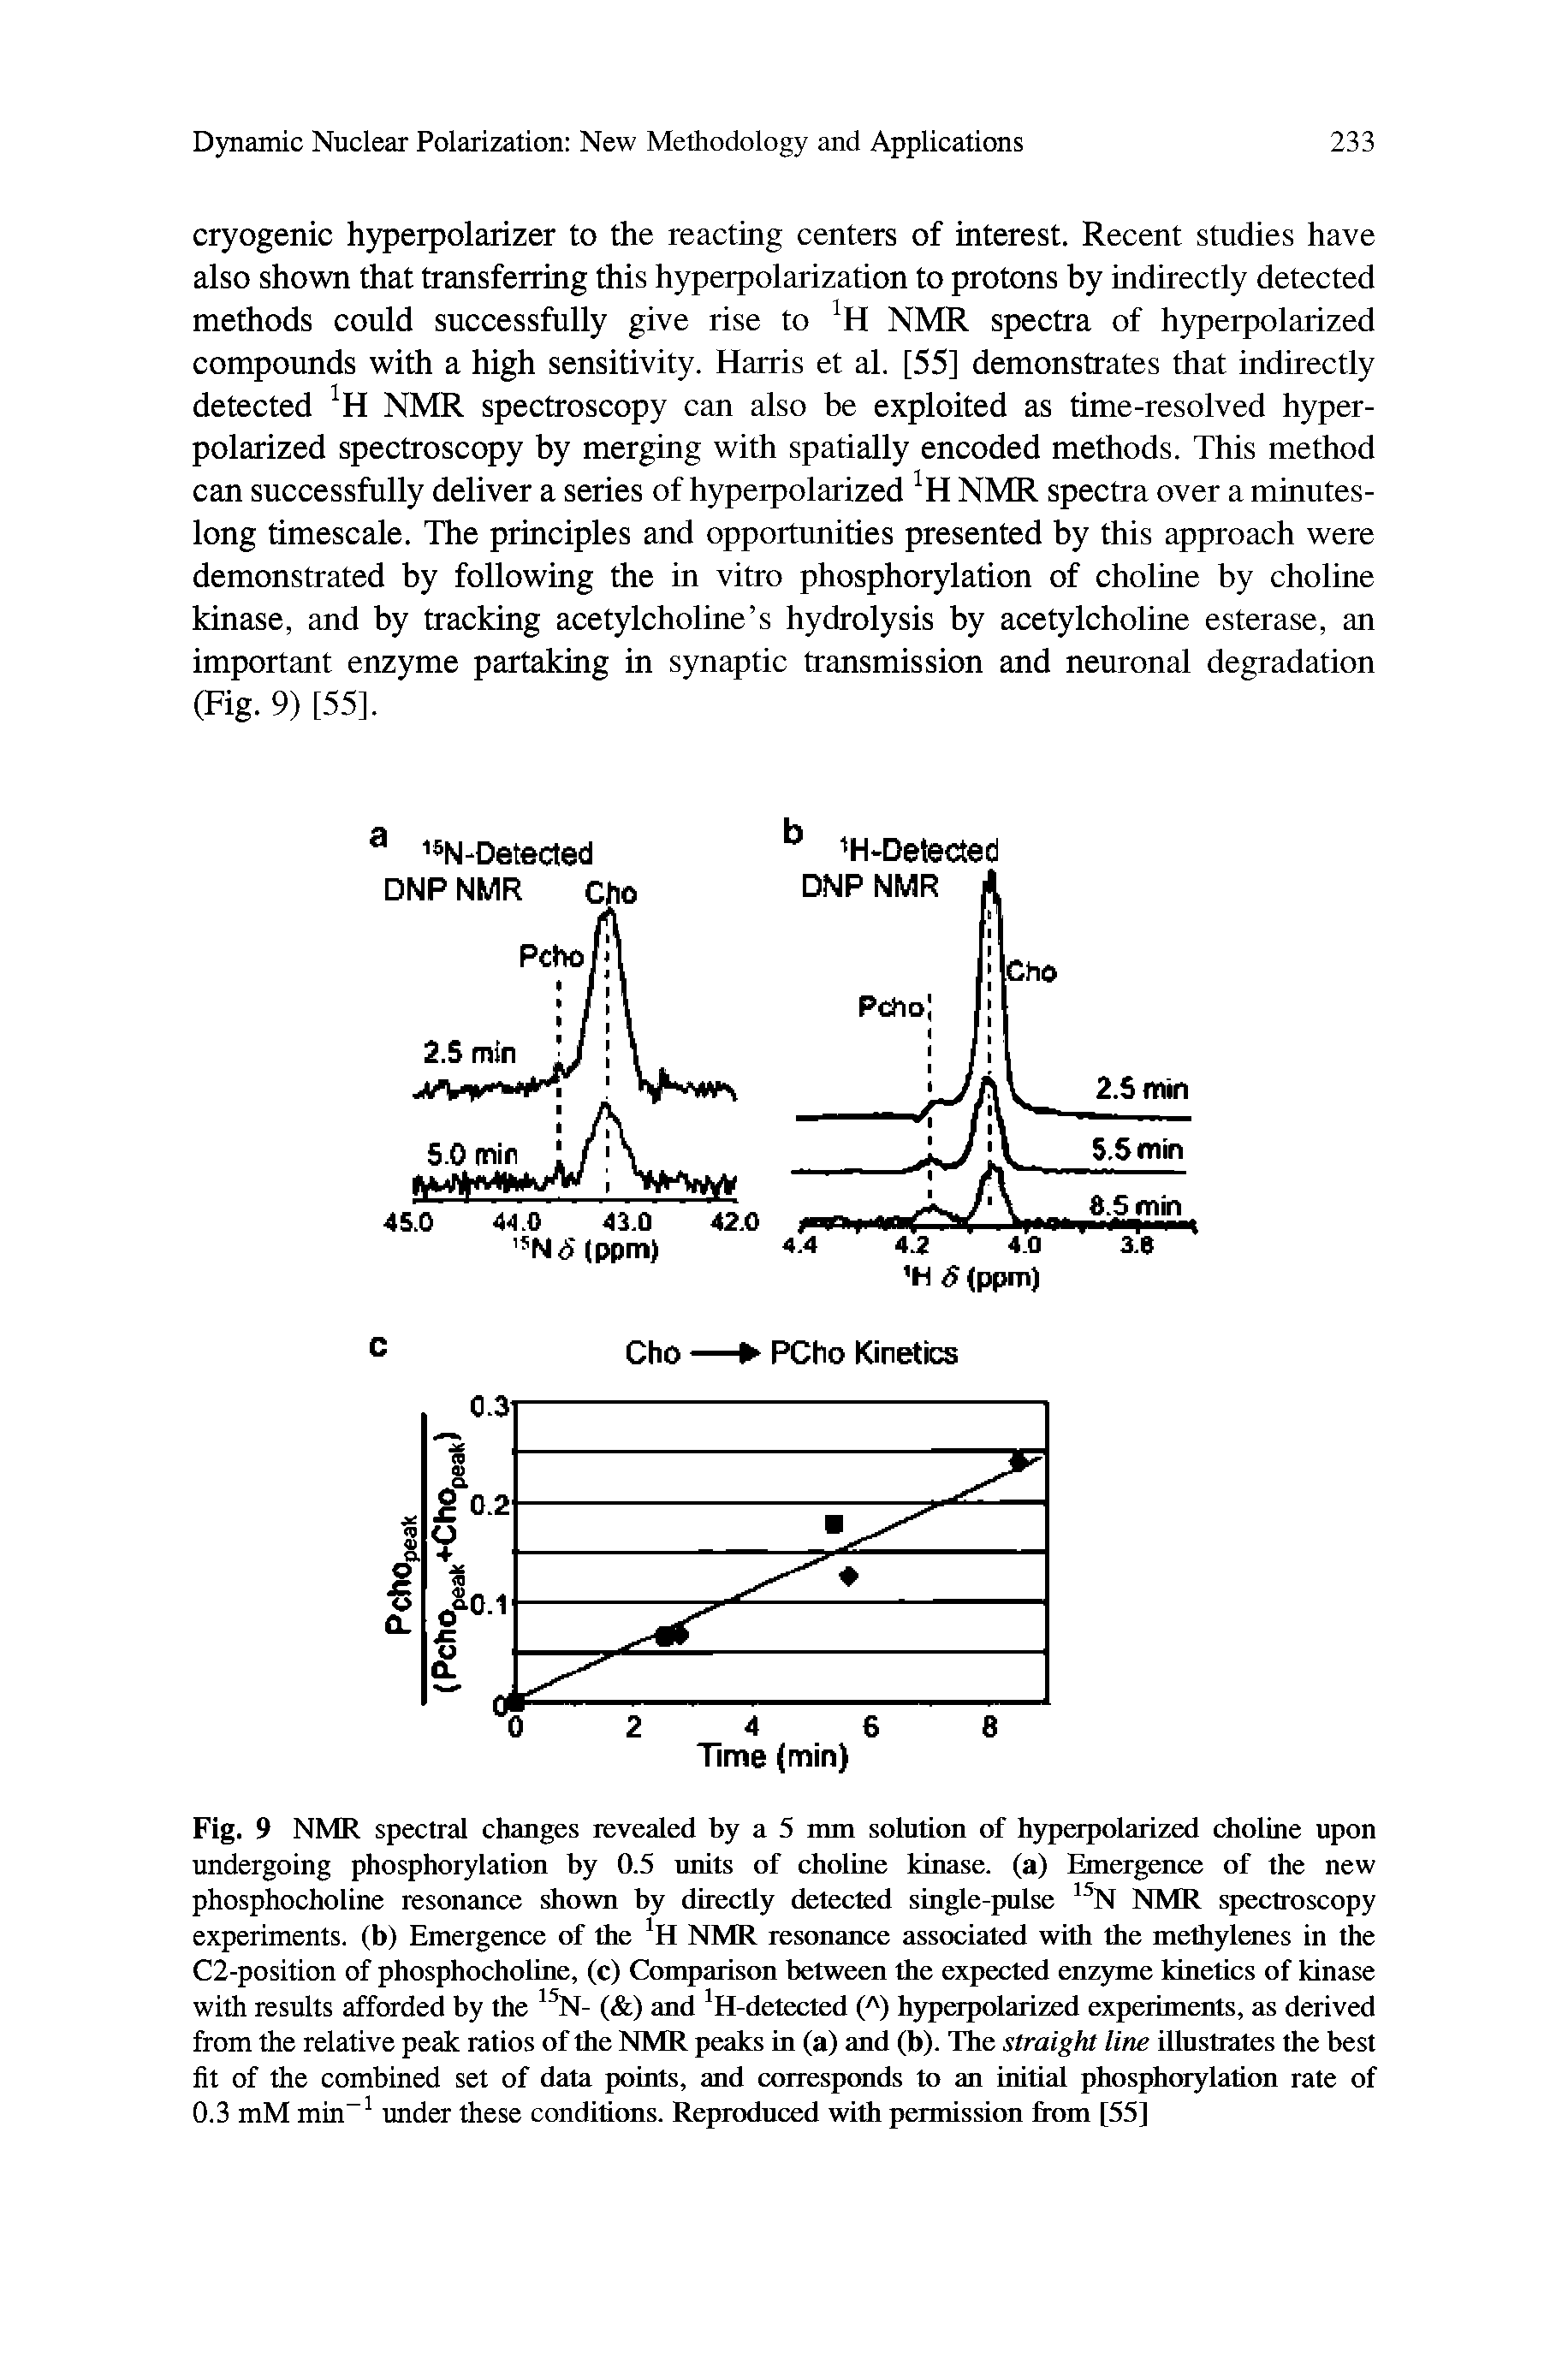 Fig. 9 NMR spectral changes revealed by a 5 mm solution of hyperpolarized choline upon undergoing phosphorylation by 0.5 units of choline kinase, (a) Emergence of the new phosphocholine resonance shown by directly detected single-pulse N NMR spectroscopy experiments, (b) Emergence of the H NMR resonance associated with the methylenes in the C2-position of phosphocholine, (c) Comparison between the expected enzyme kinetics of kinase with results afforded by the N- ( ) and H-detected ( ) hyperpolarized experiments, as derived from the relative peak ratios of the NMR peaks in (a) and (b). The straight line illustrates the best fit of the combined set of data points, and corresponds to an initial phosphorylation rate of 0.3 mM min under these conditions. Reproduced with permission from [55]...